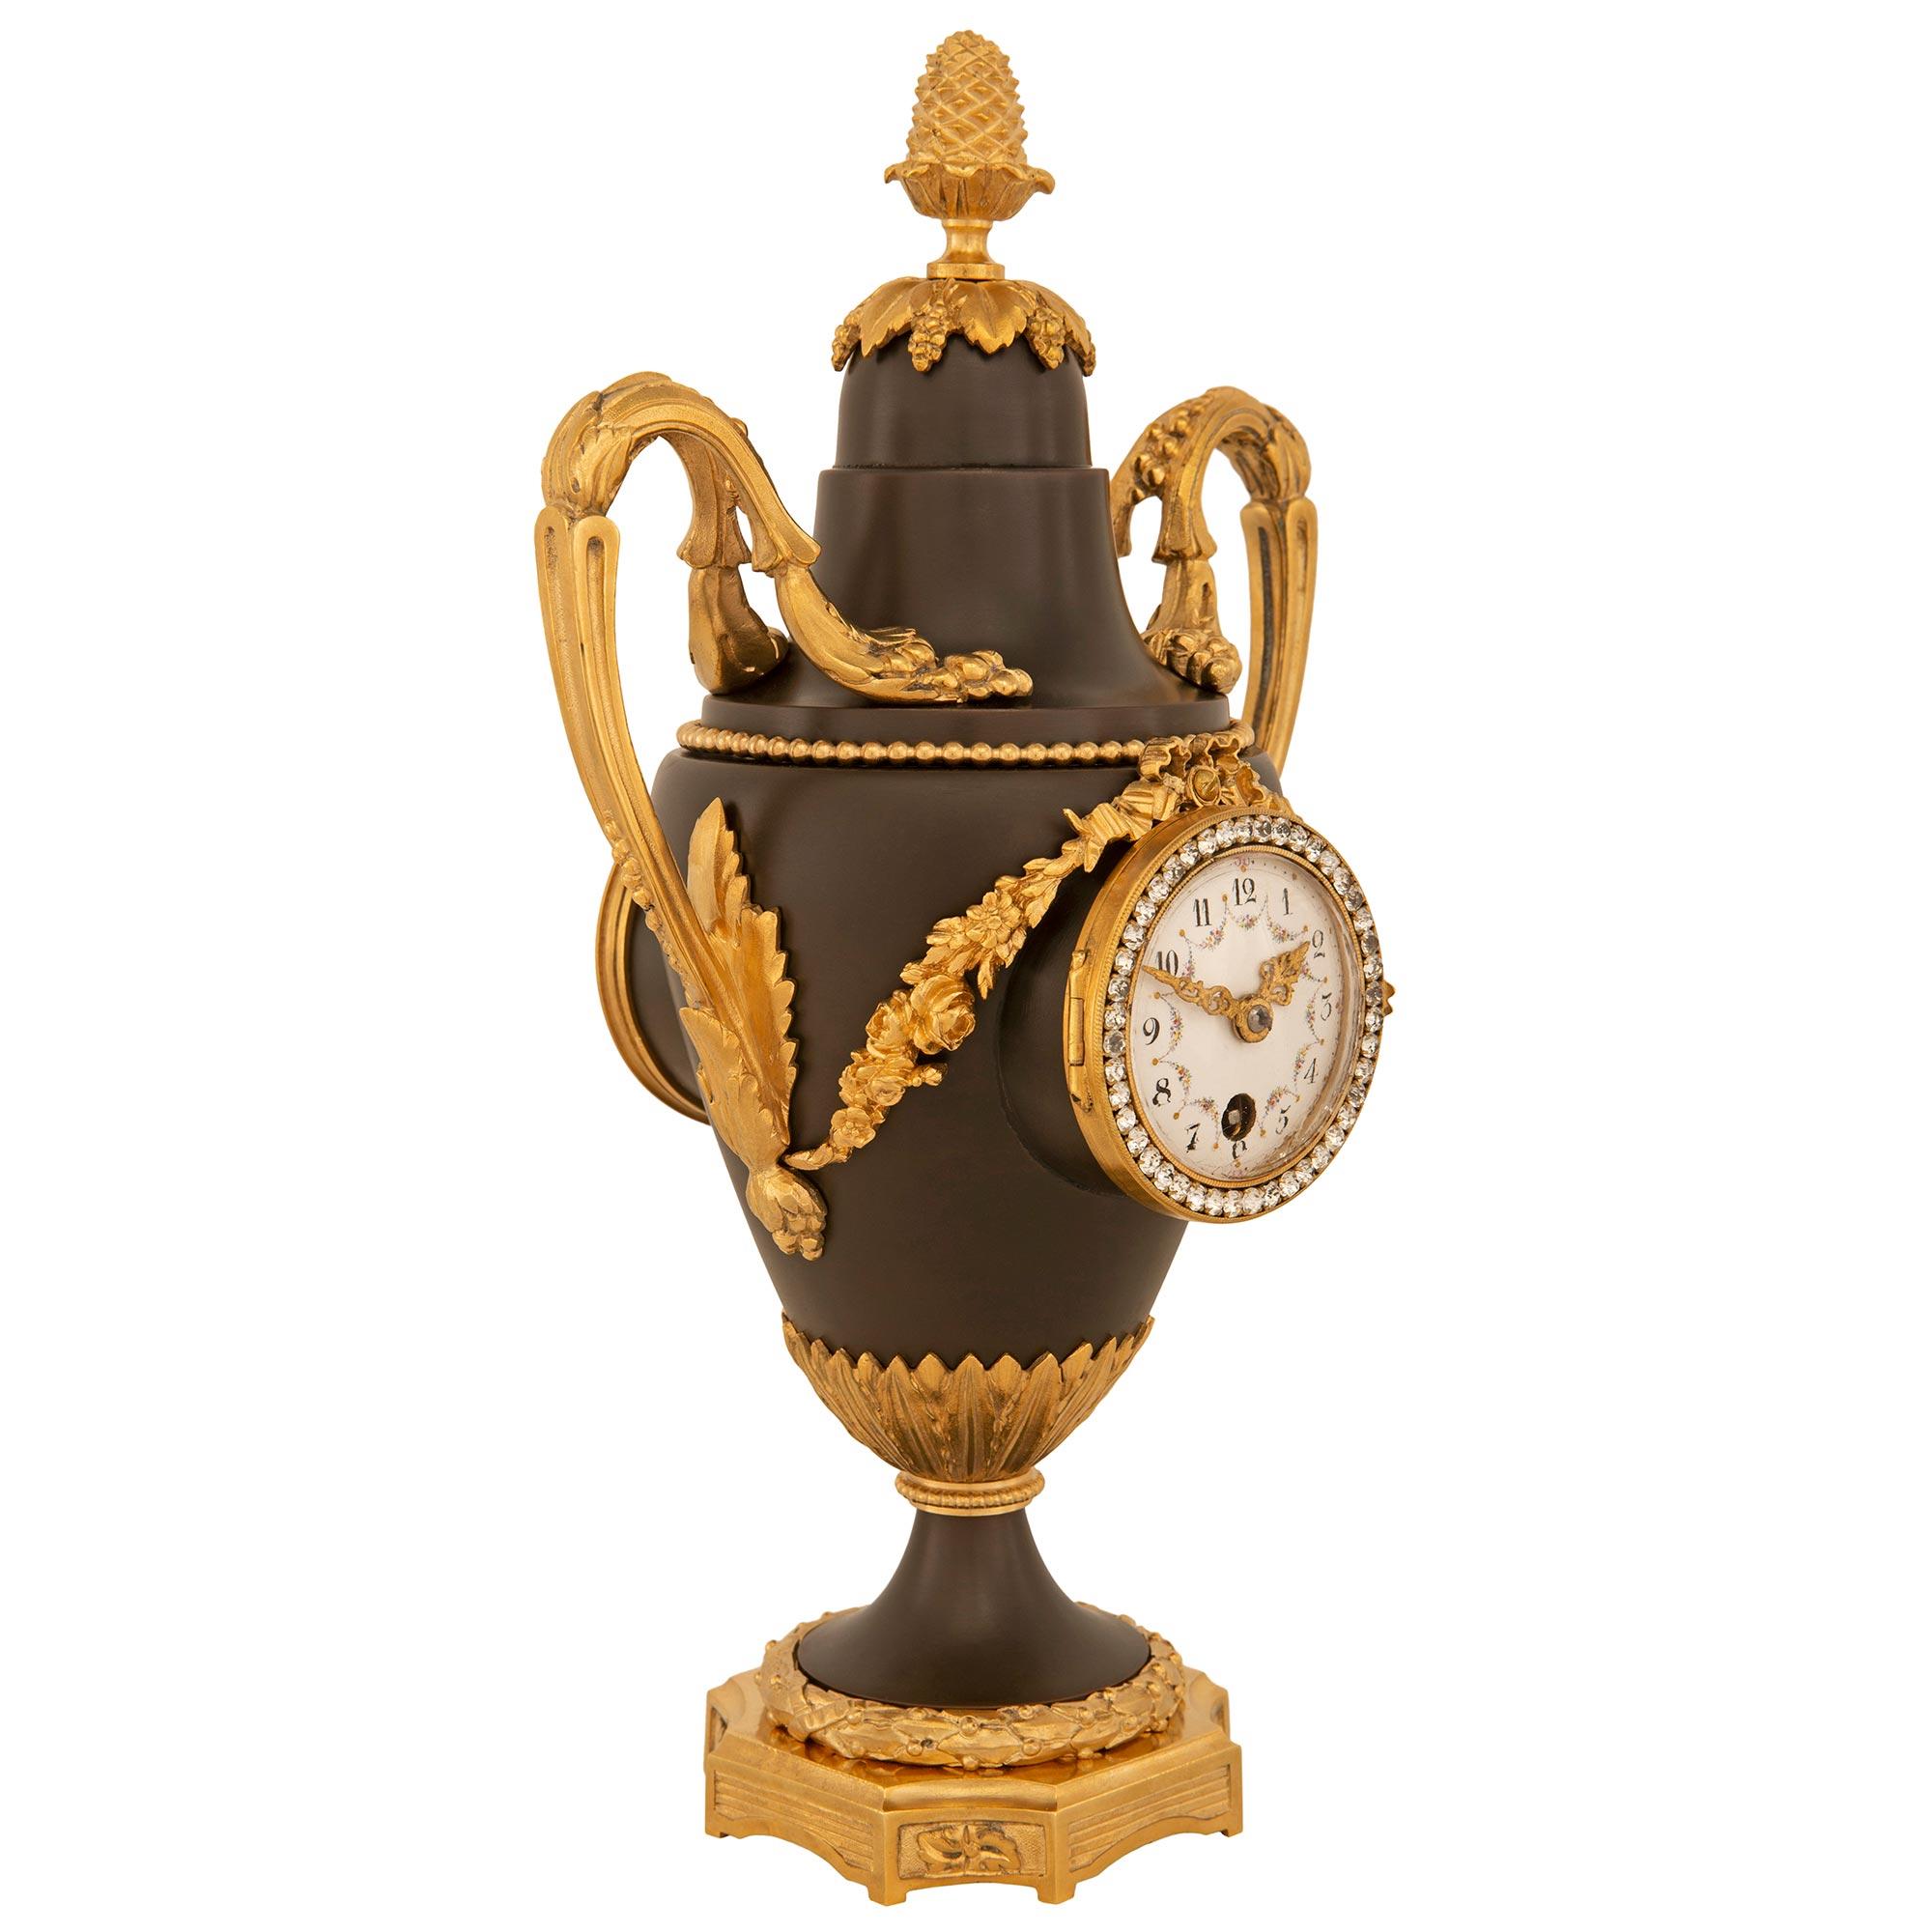 An elegant French late 19th century Louis XVI st. Patinated Bronze and Ormolu clock. The clock in the shape of the Urn of Prosperity is raised by a square base with concave corners and recessed panels. The concave panels are decorated by rosettes